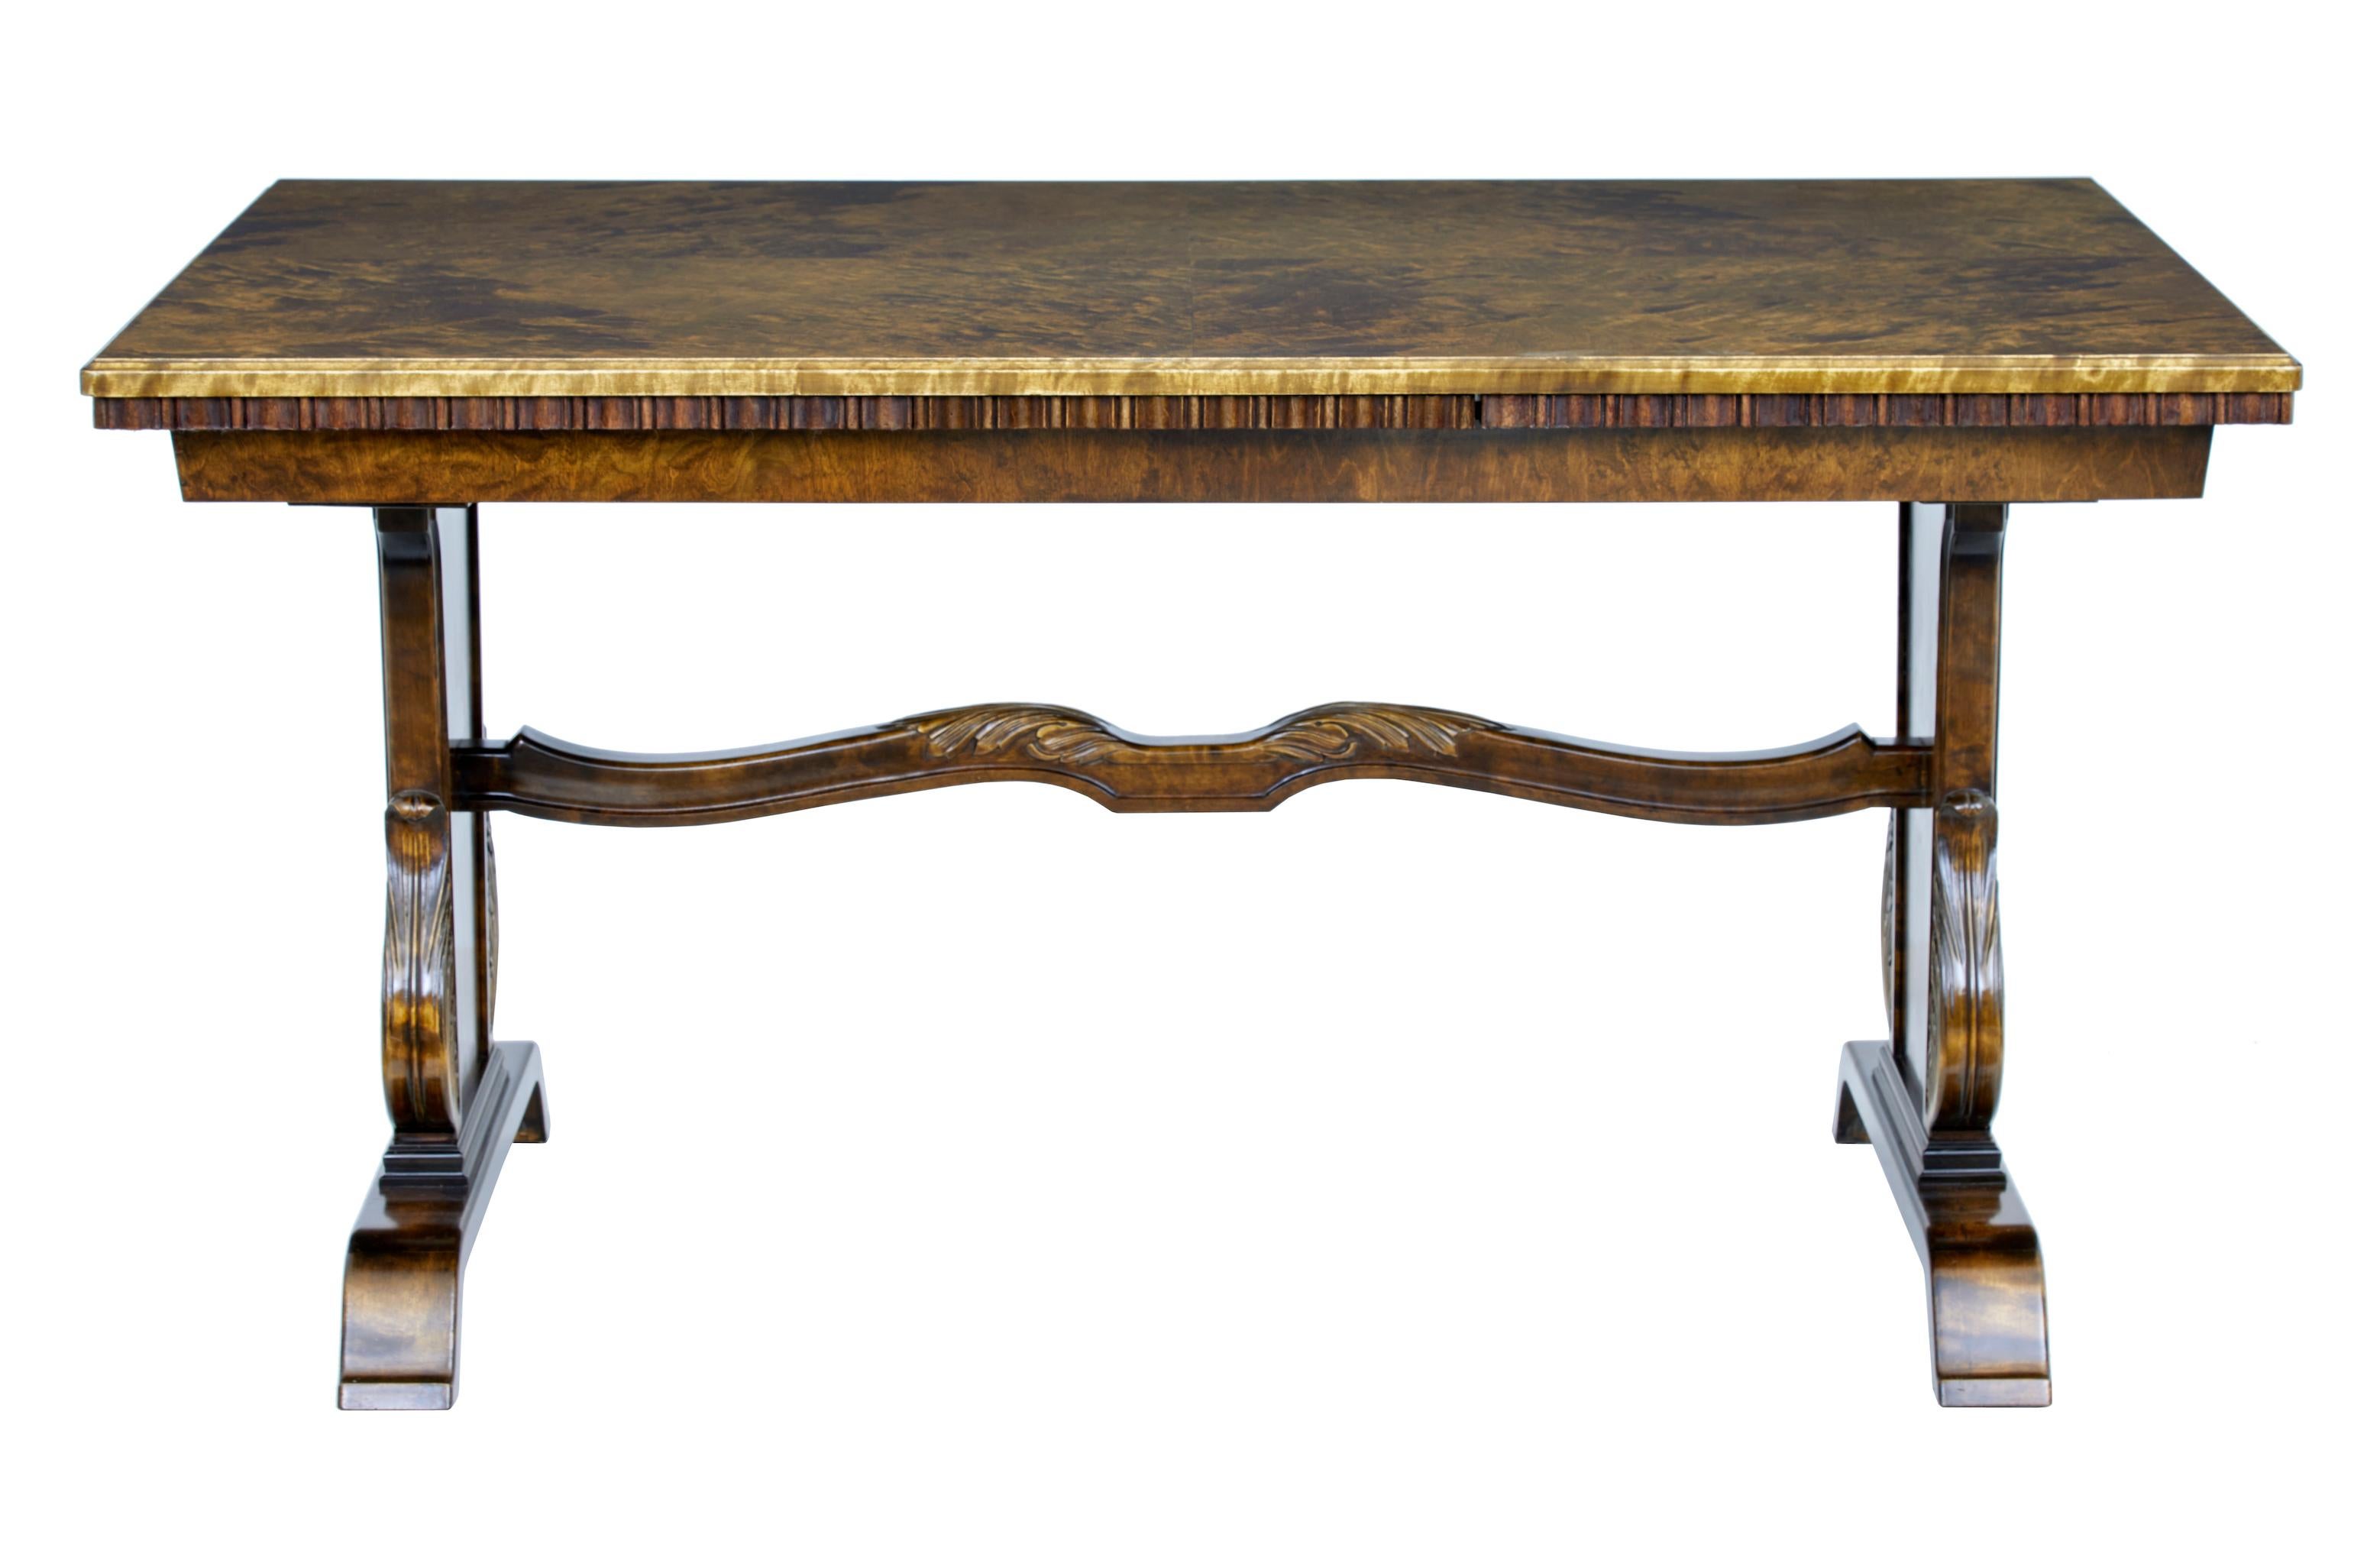 Art Deco Mid-20th Century Swedish Birch Extending Dining Table by Bodafors smf